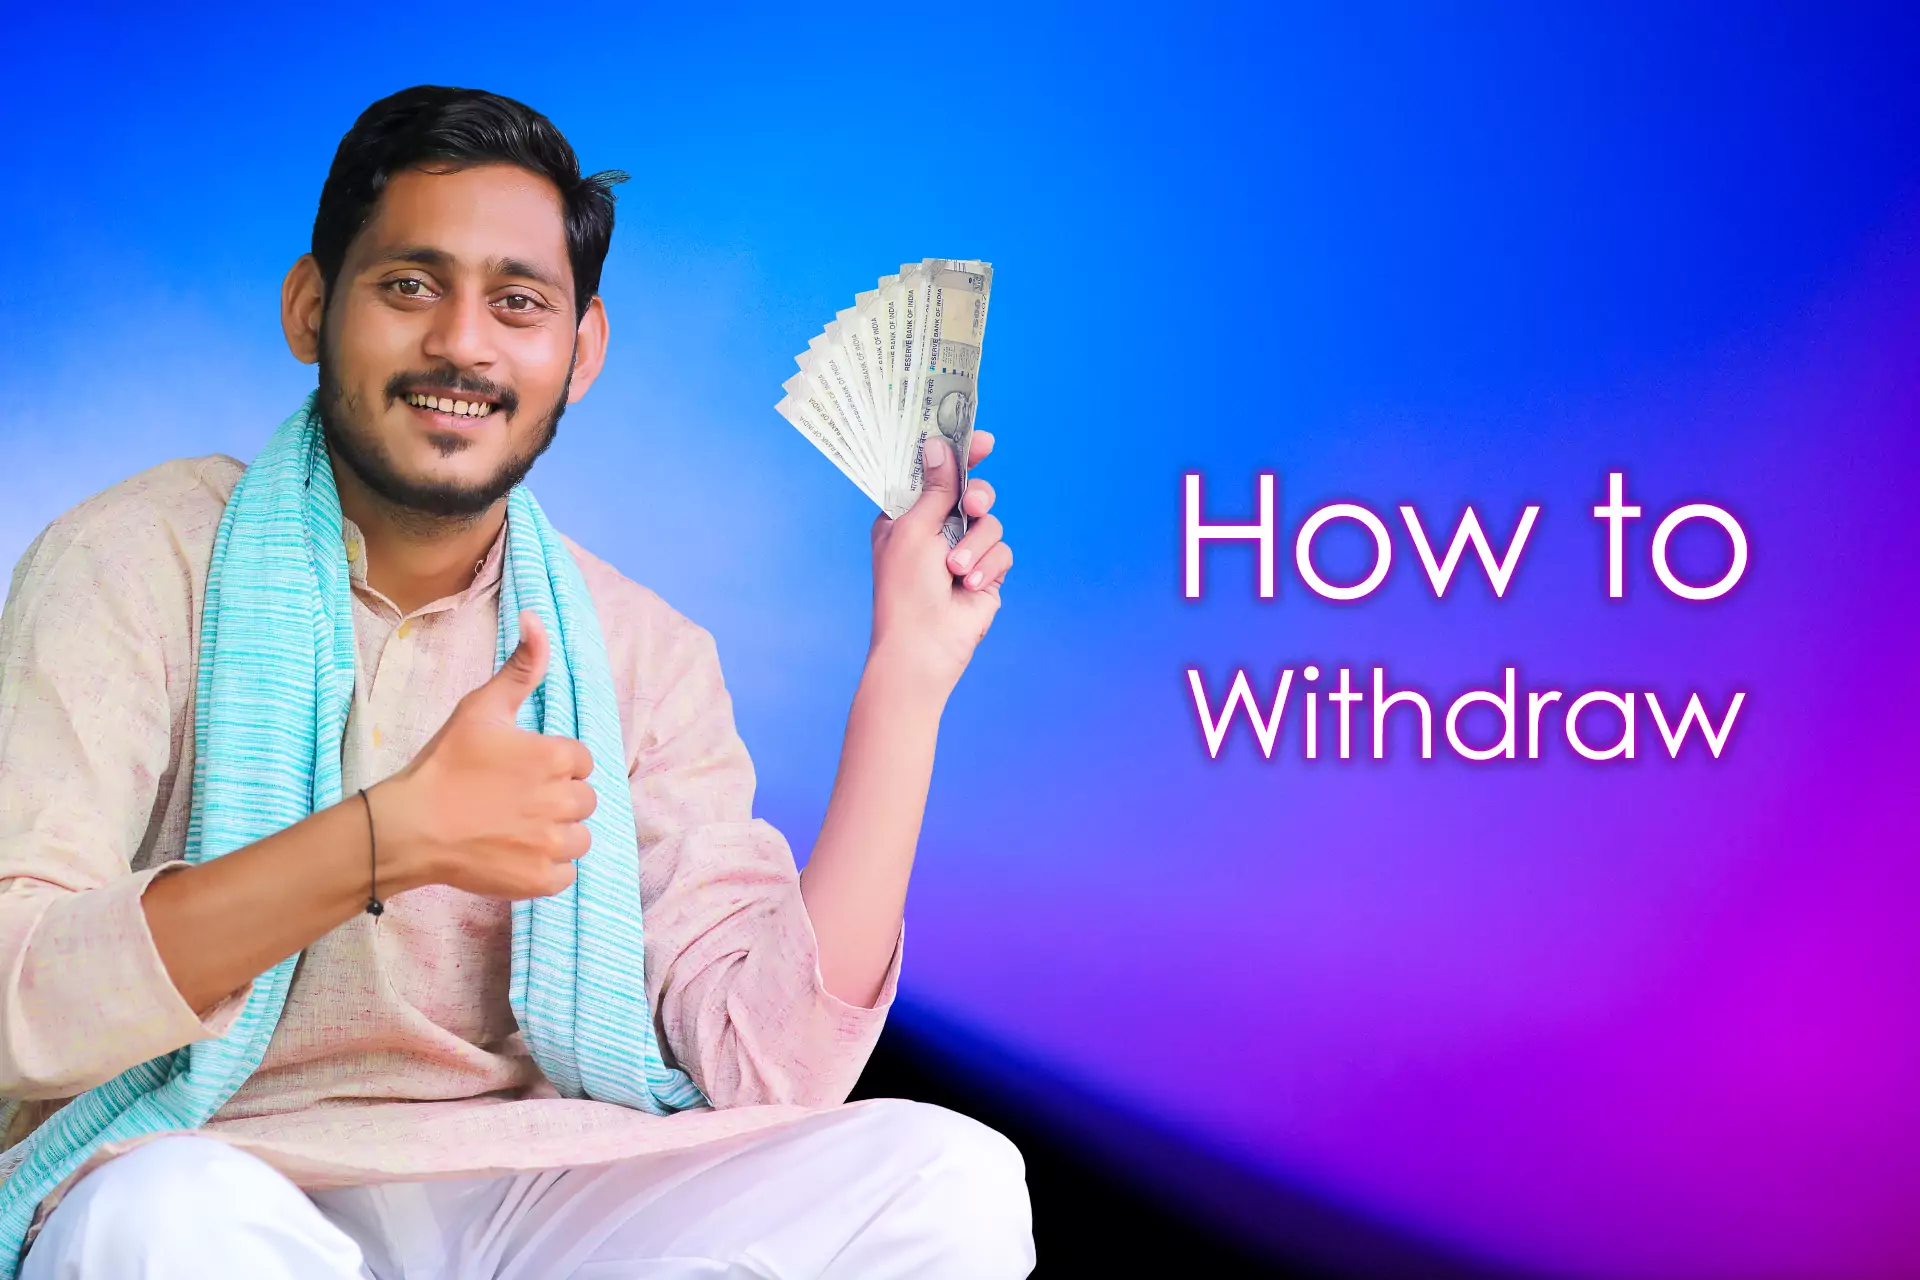 If you win playing casino, you can immediately withdraw funds to your Rupay card.